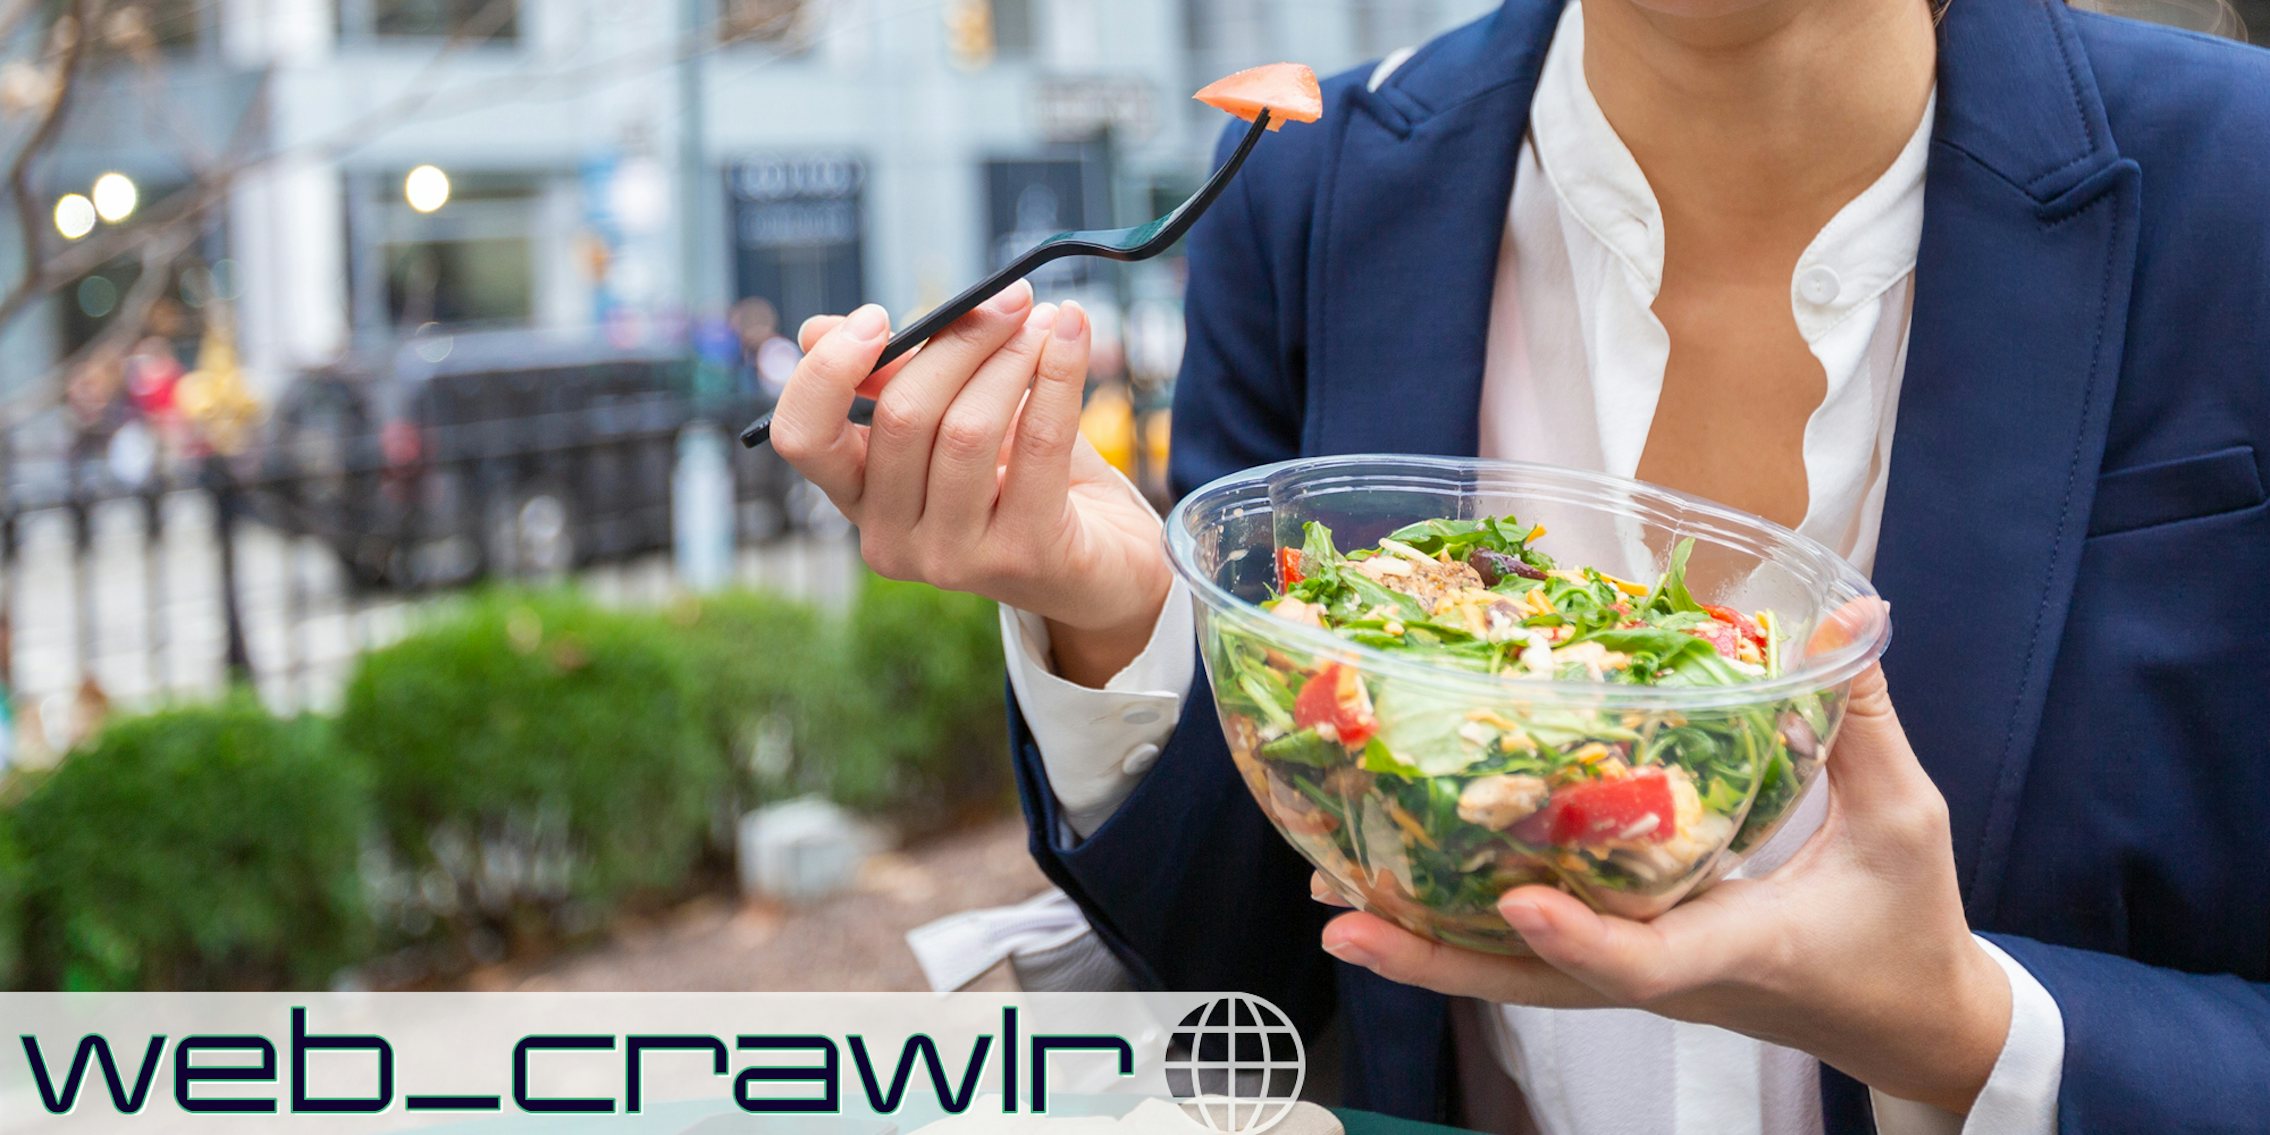 A person holding a bowl of salad. The Daily Dot newsletter web_crawlr logo is in the bottom left corner.